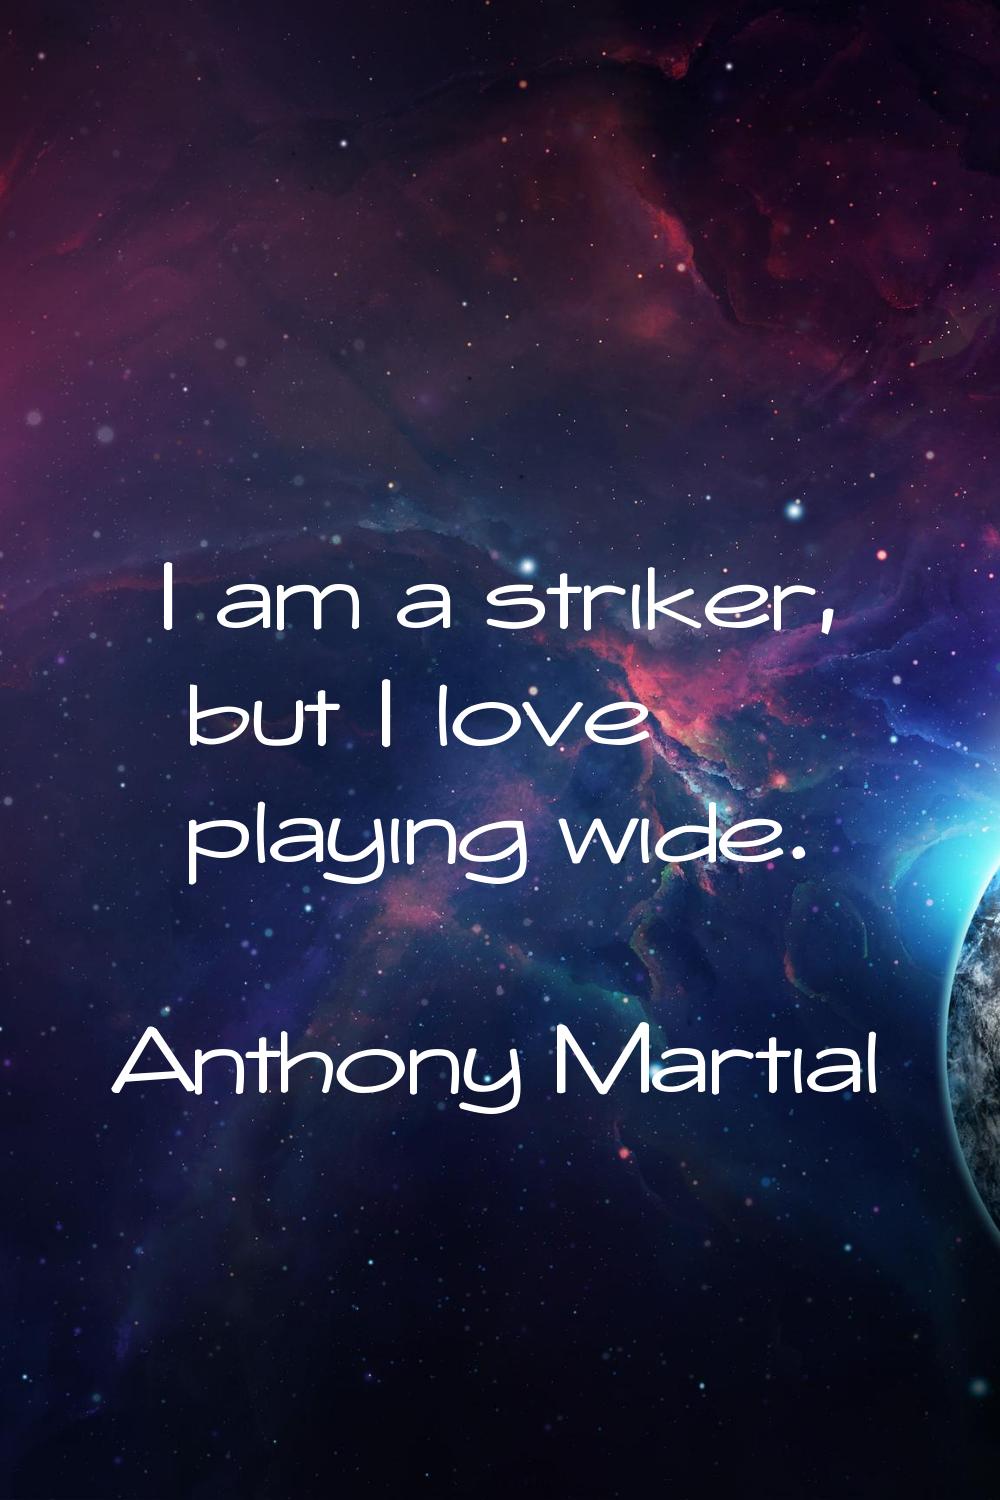 I am a striker, but I love playing wide.